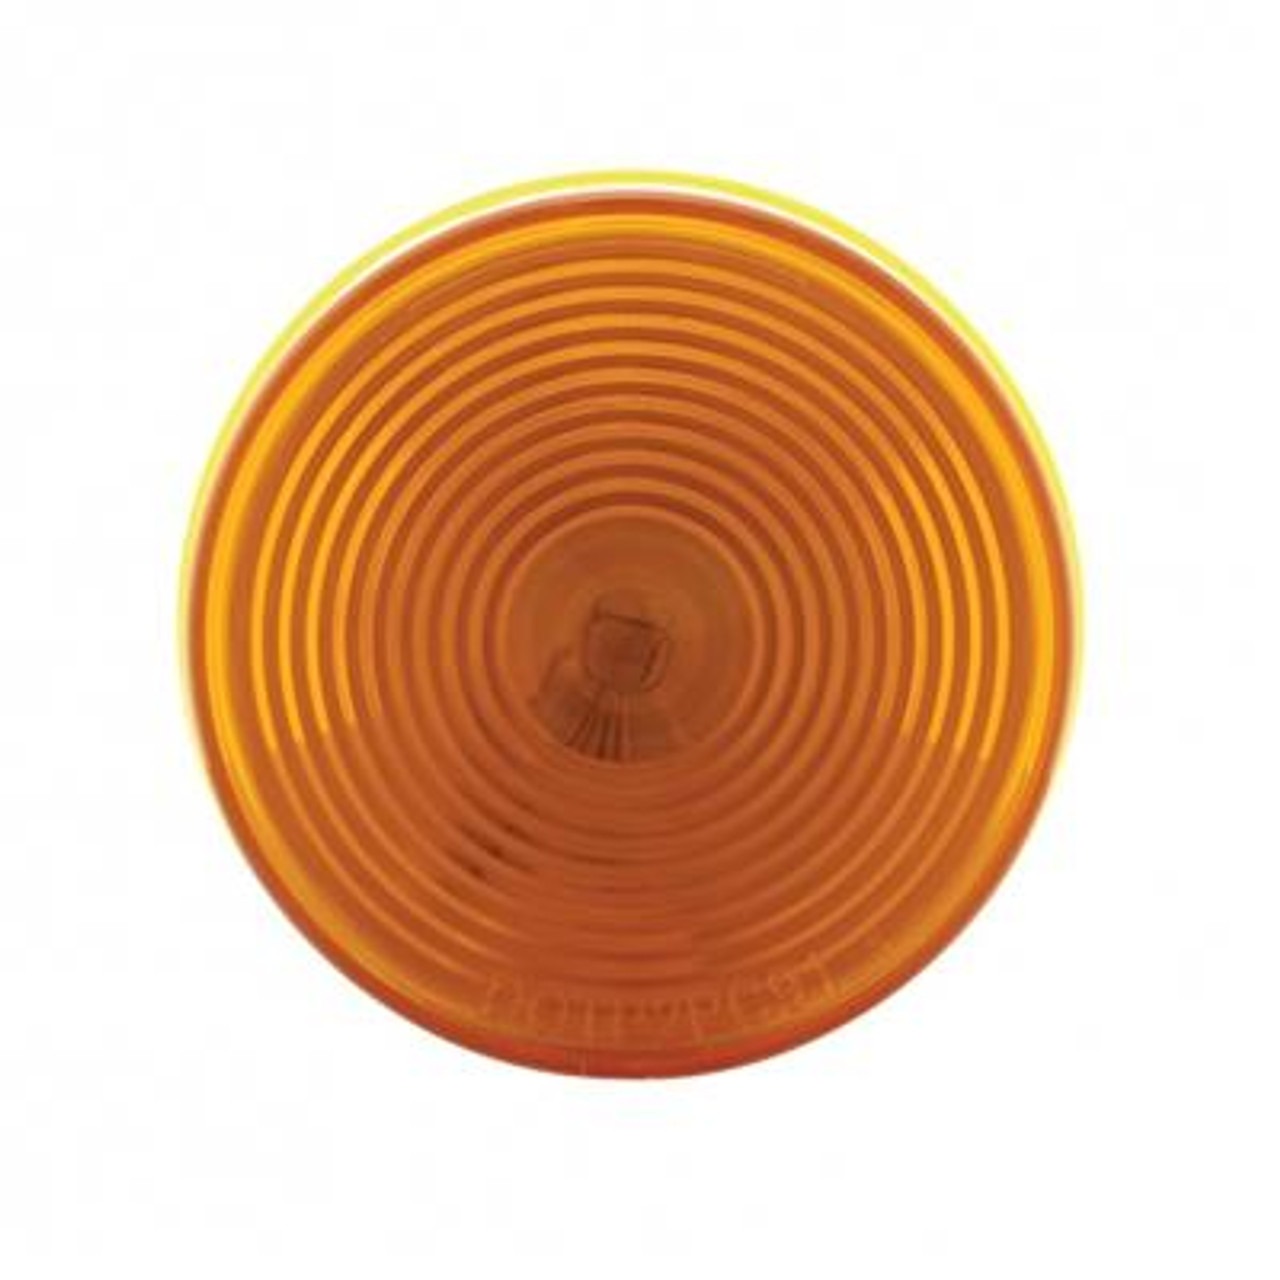 2-1/2" Round Light (Clearance/Marker) - Amber Lens